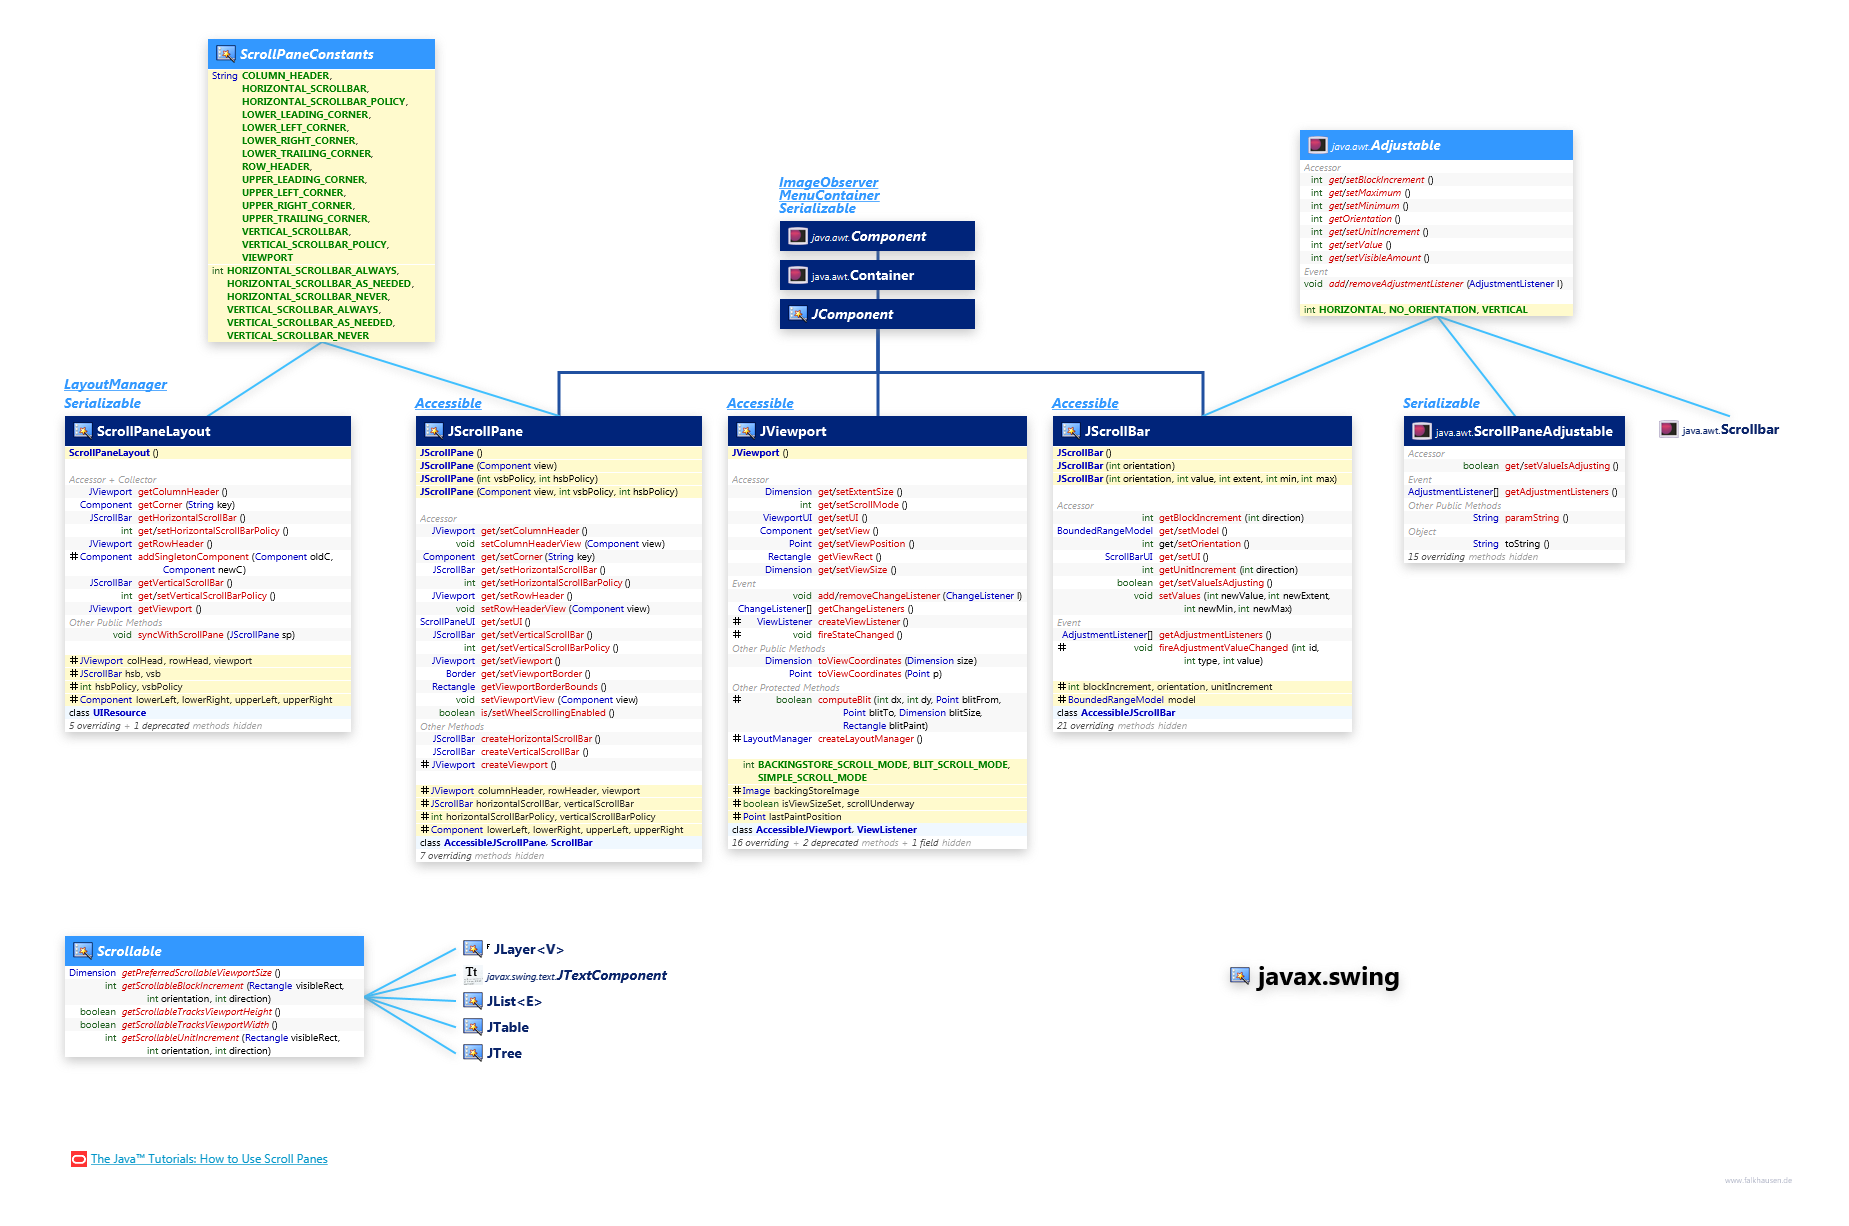 javax.swing Scrolling class diagram and api documentation for Java 8